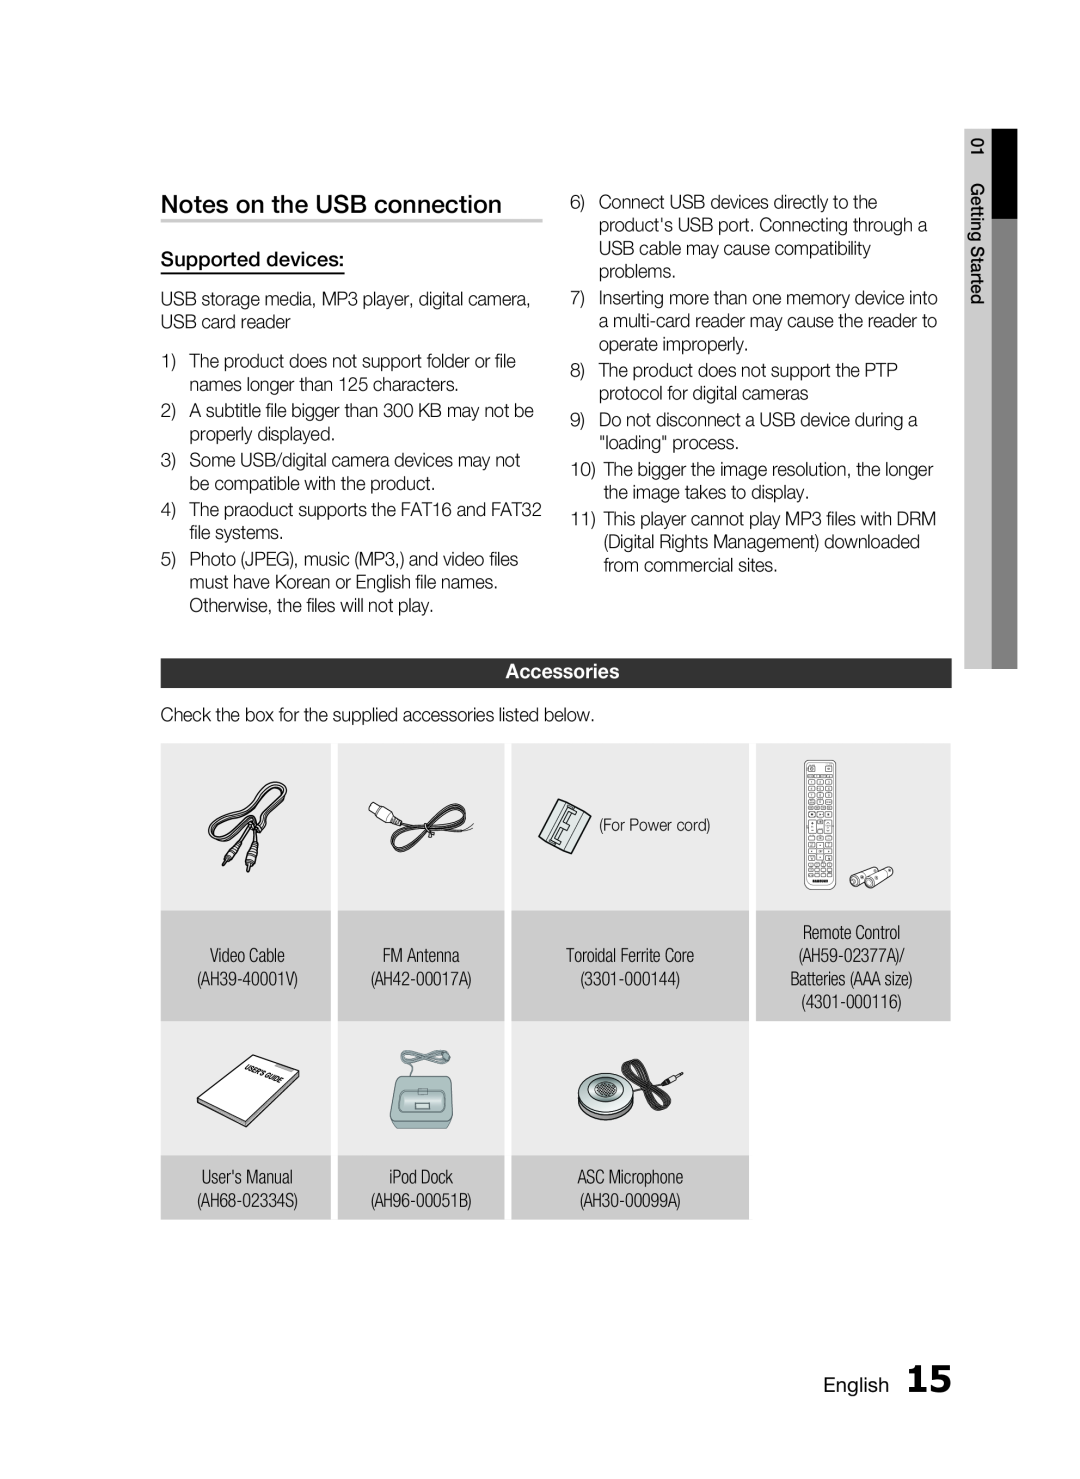 Samsung HW-D7000 user manual Notes on the USB connection, Accessories 